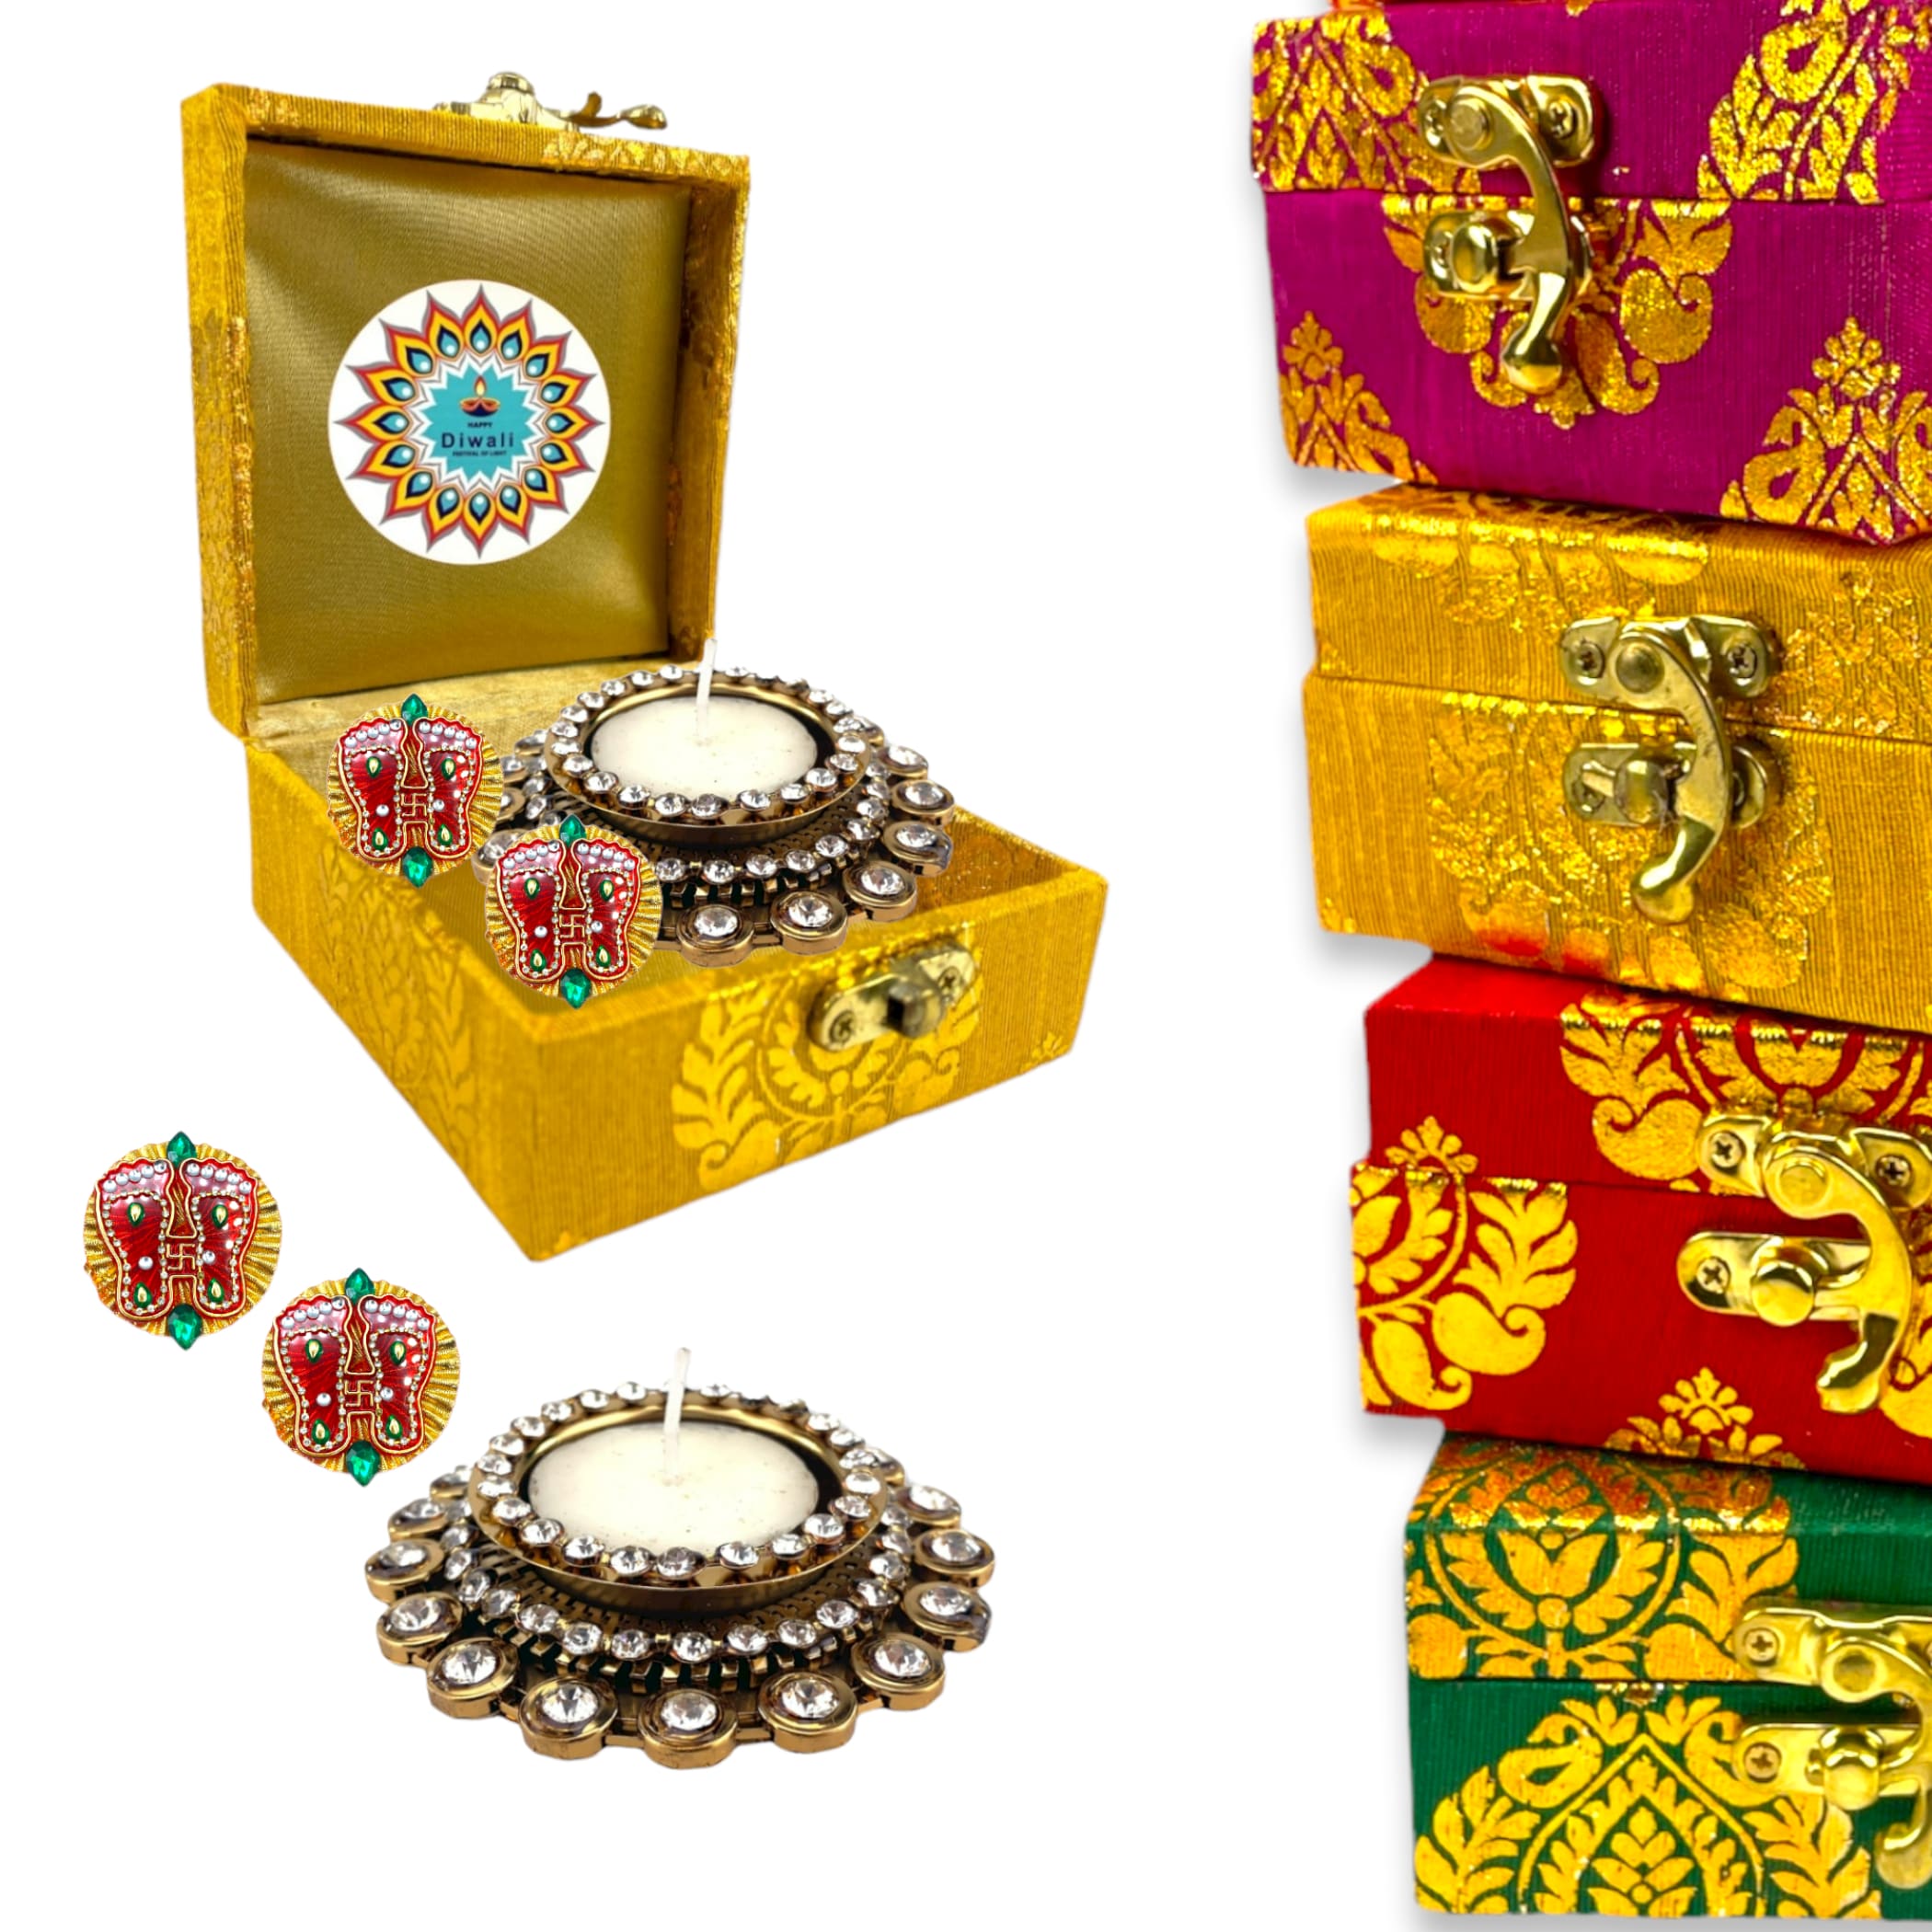 Candle holder personalize diwali gifts boxes navratri gift